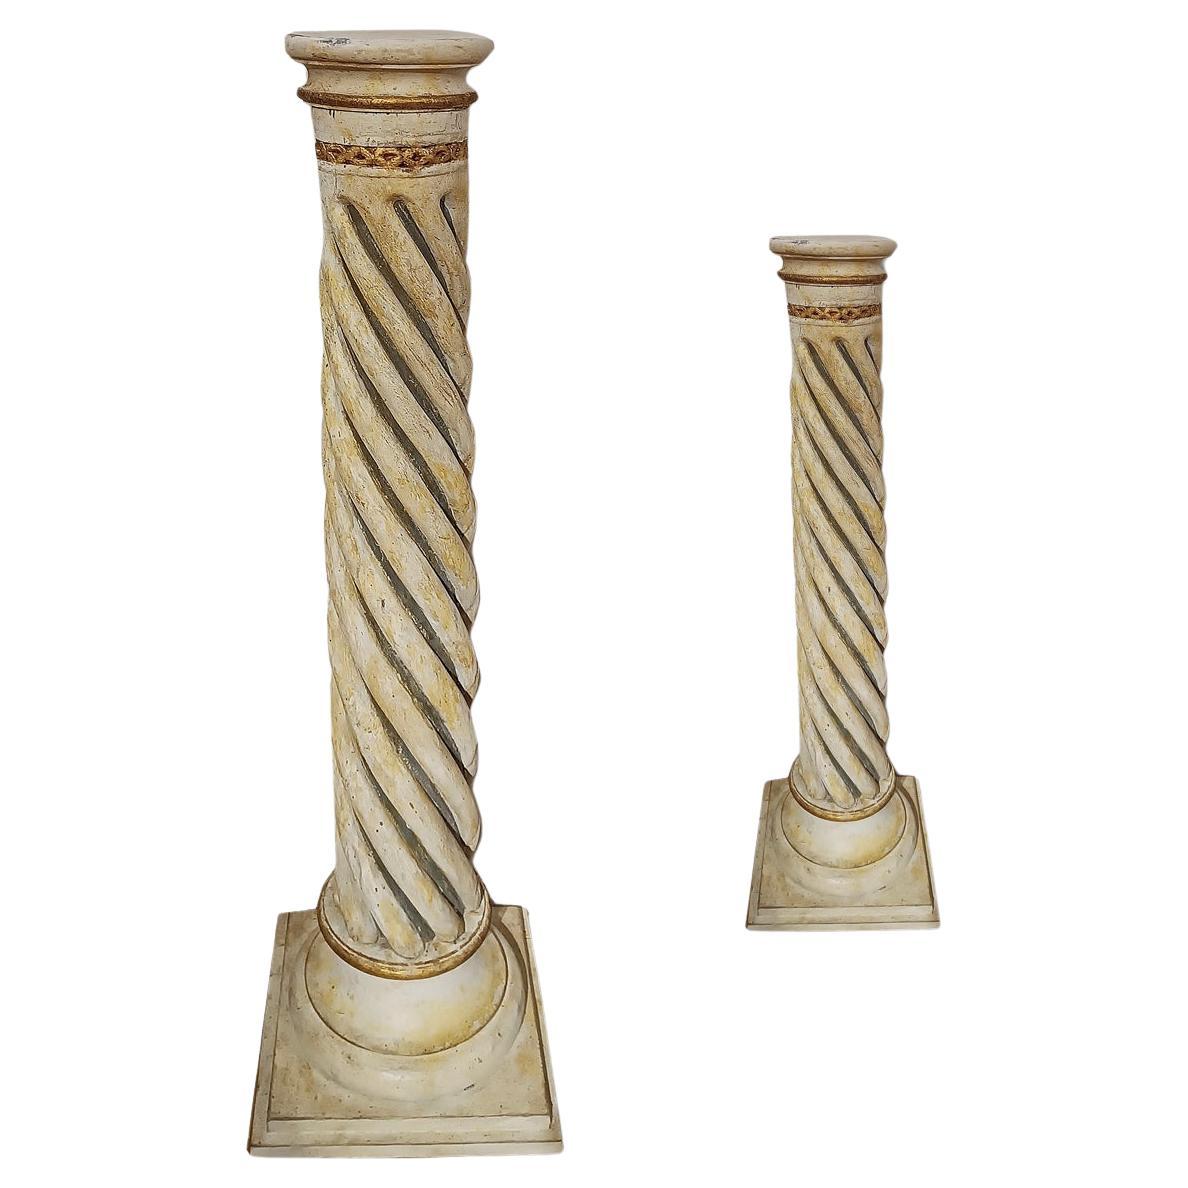 18th CENTURY PAIR OF PAINTED WOOD TWISTED COLUMNS